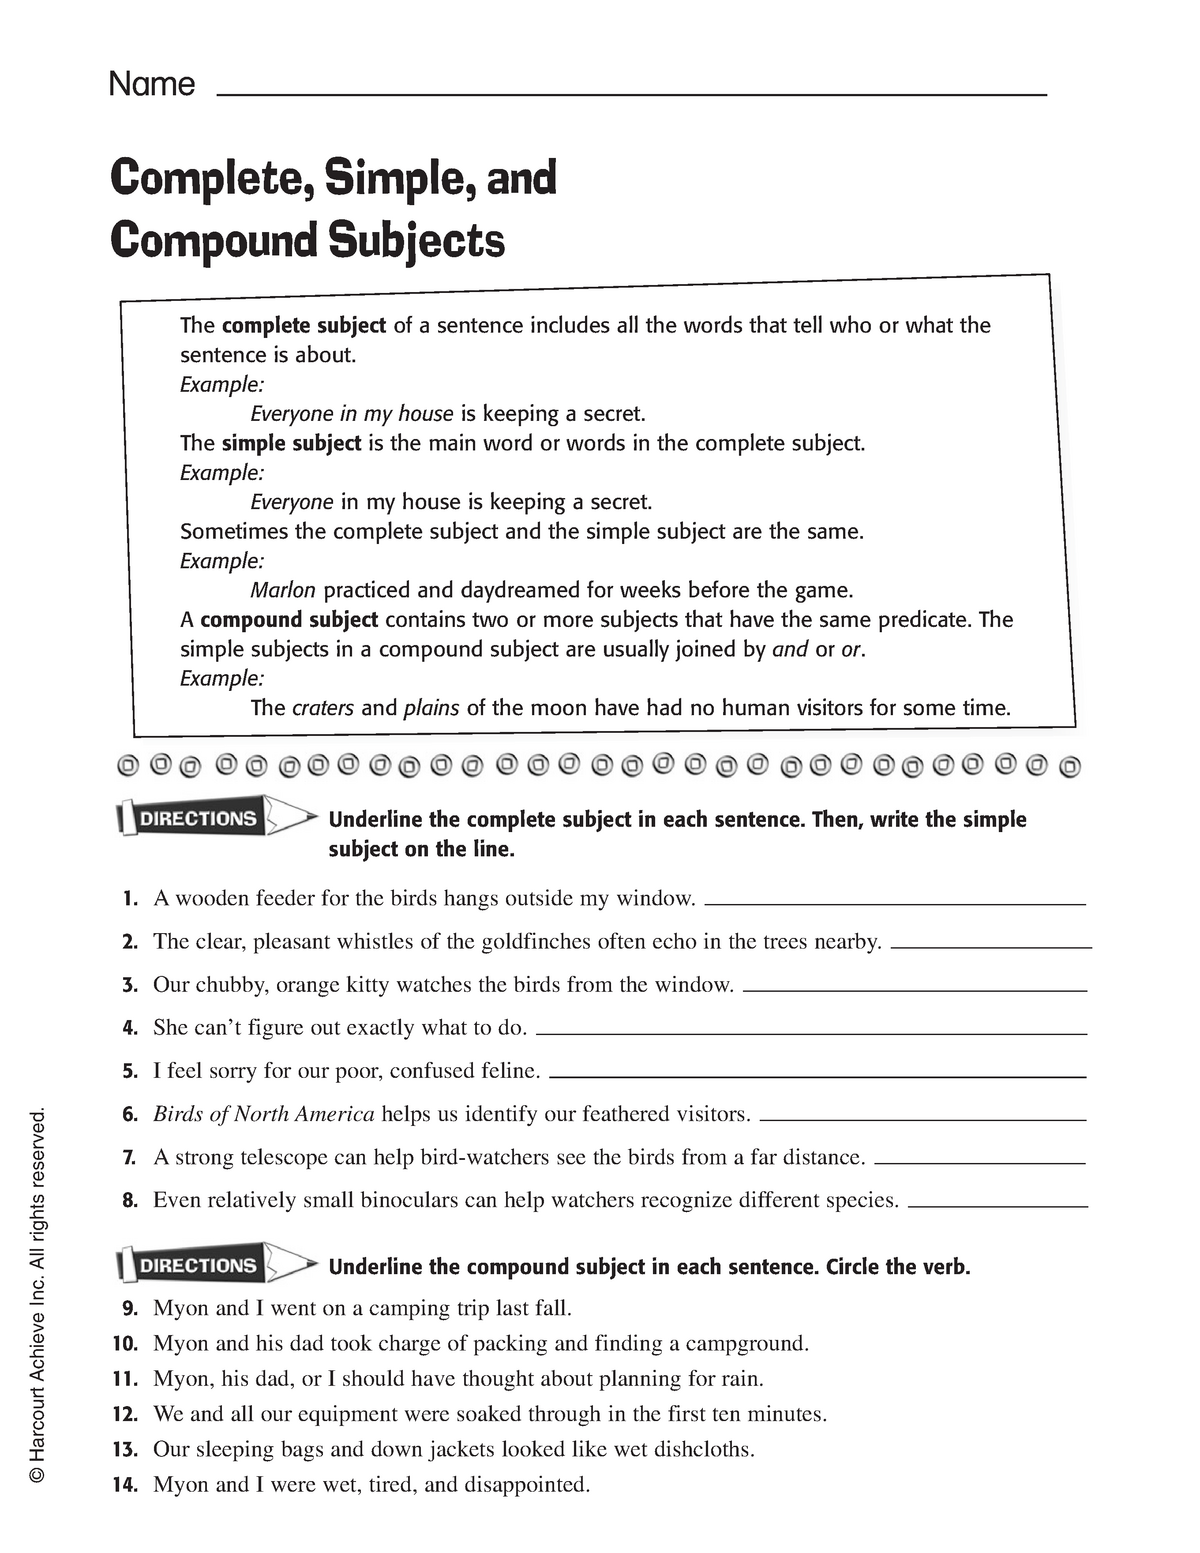 Spanish Lecture Notes - Complete, Simple, and Compound Subjects The ...